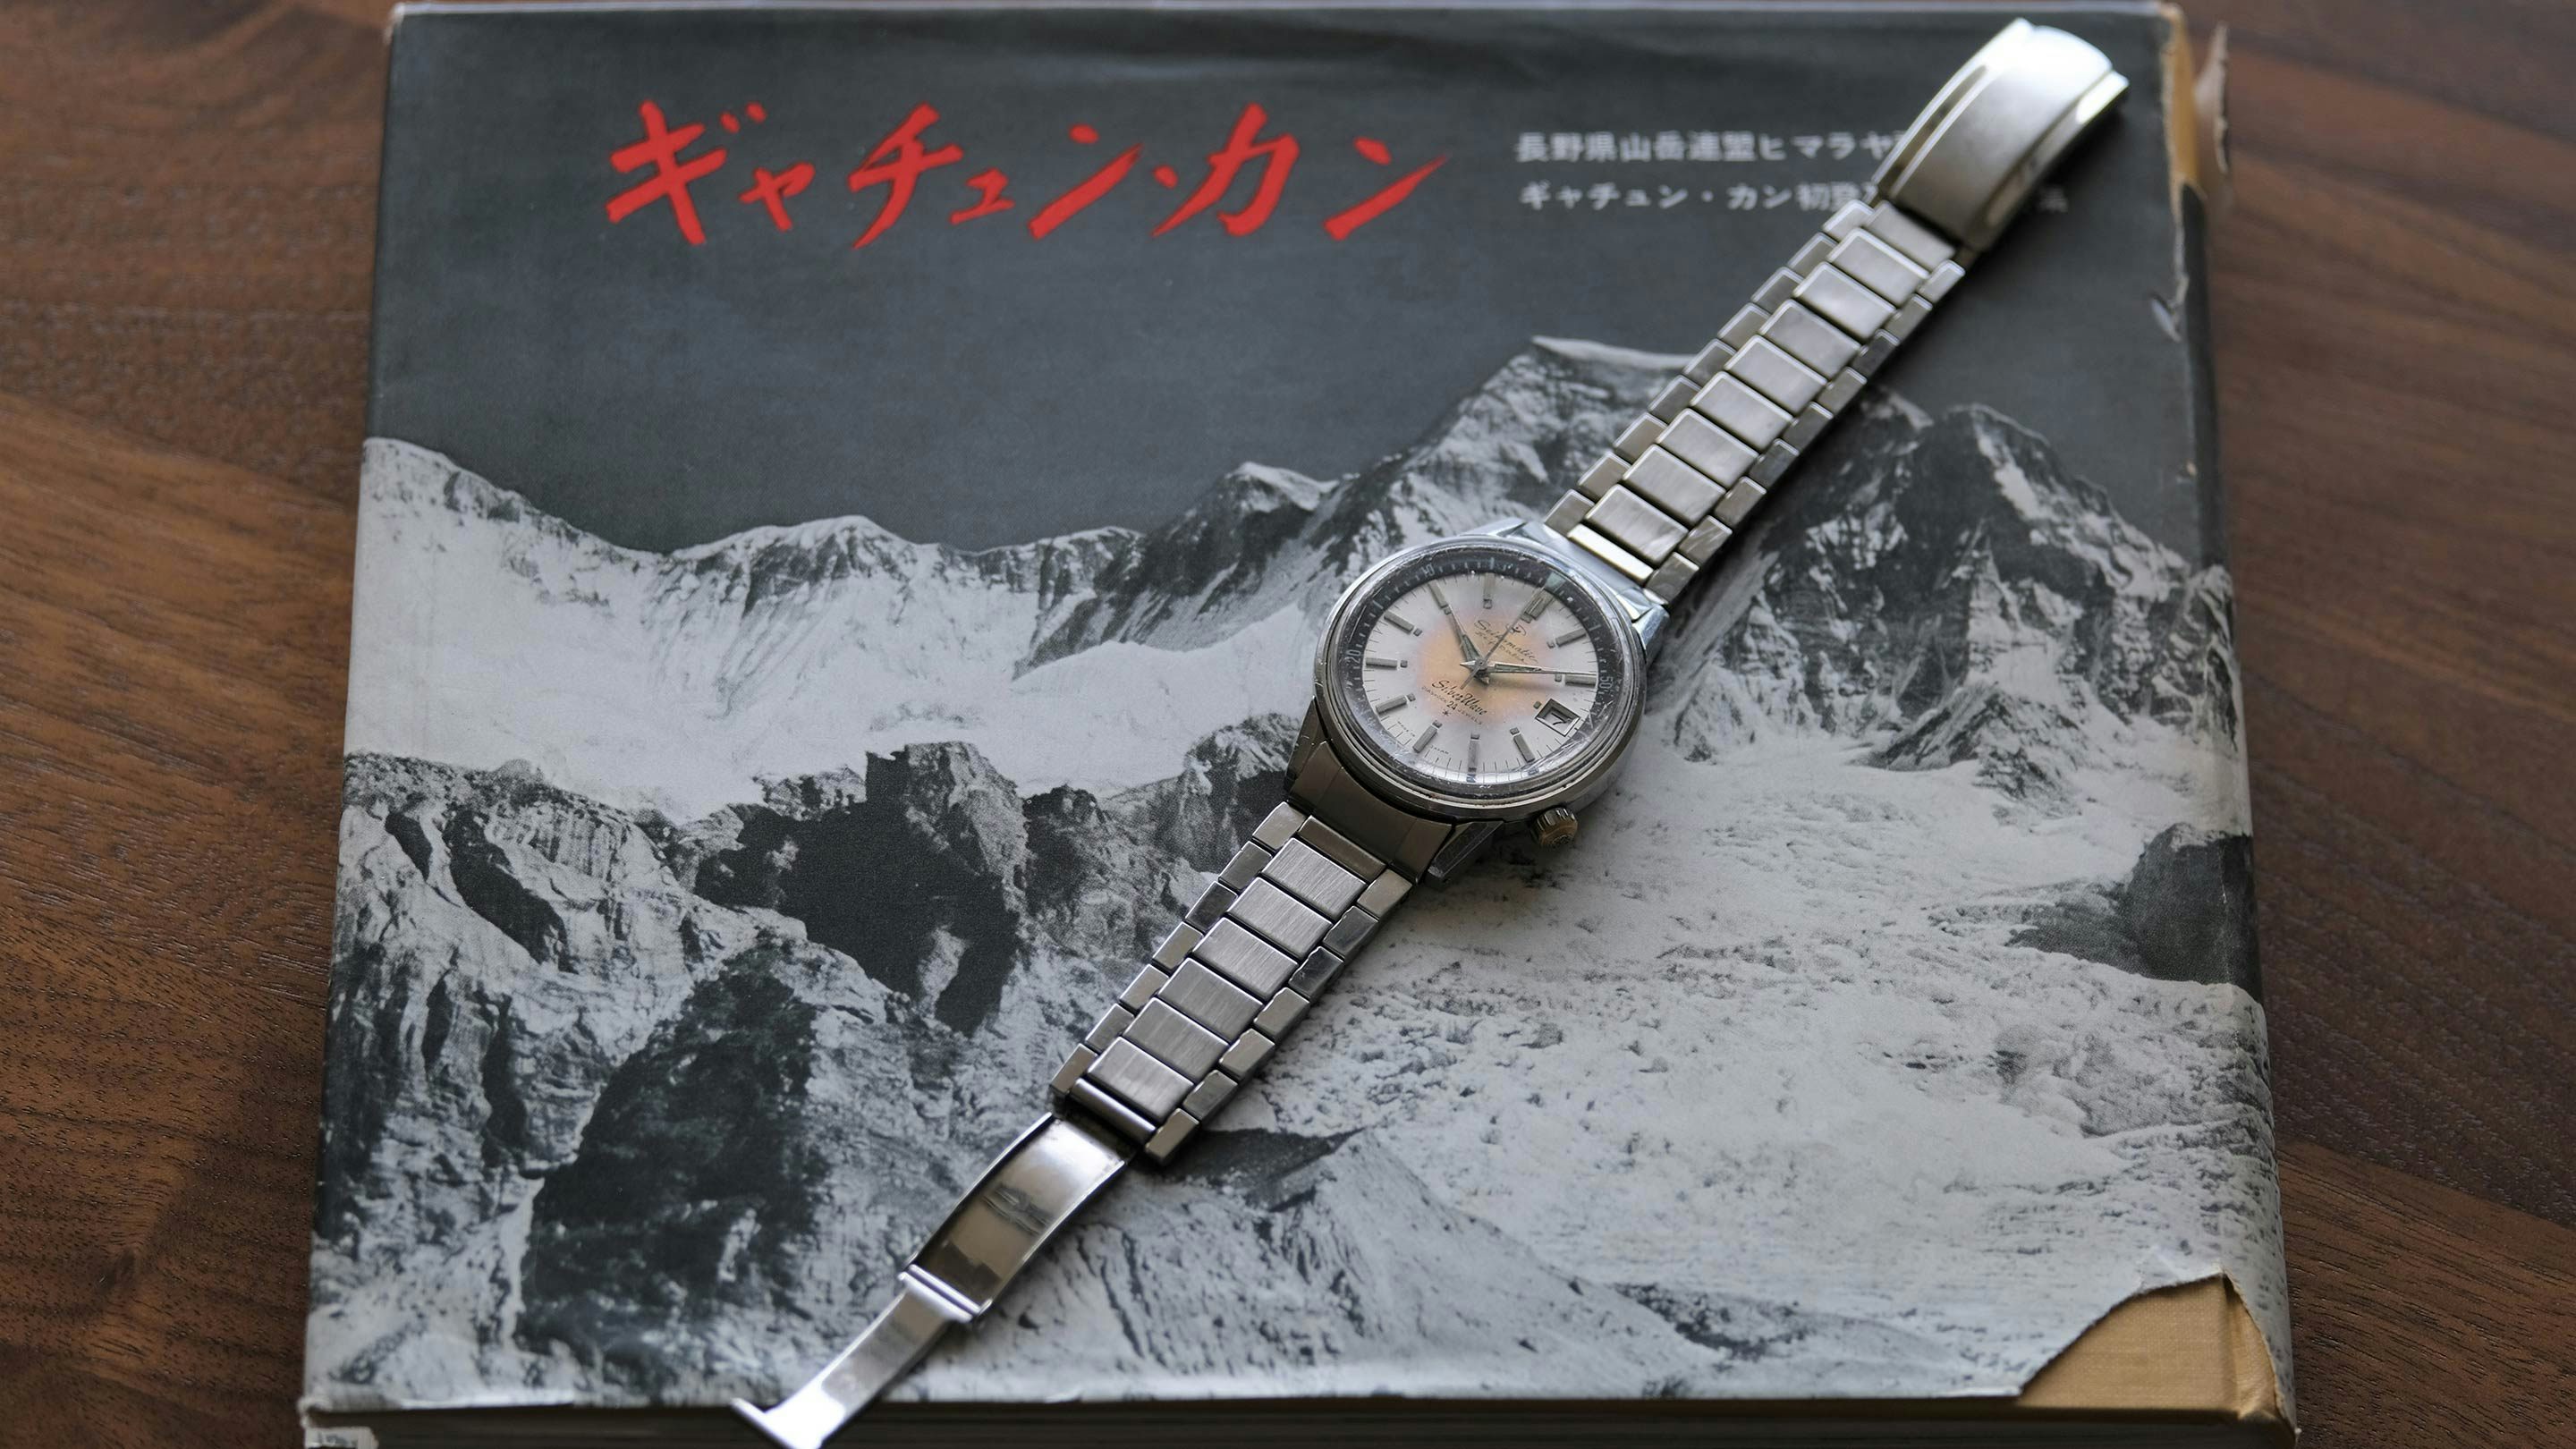 This Seiko Silverwave re-writes horological history